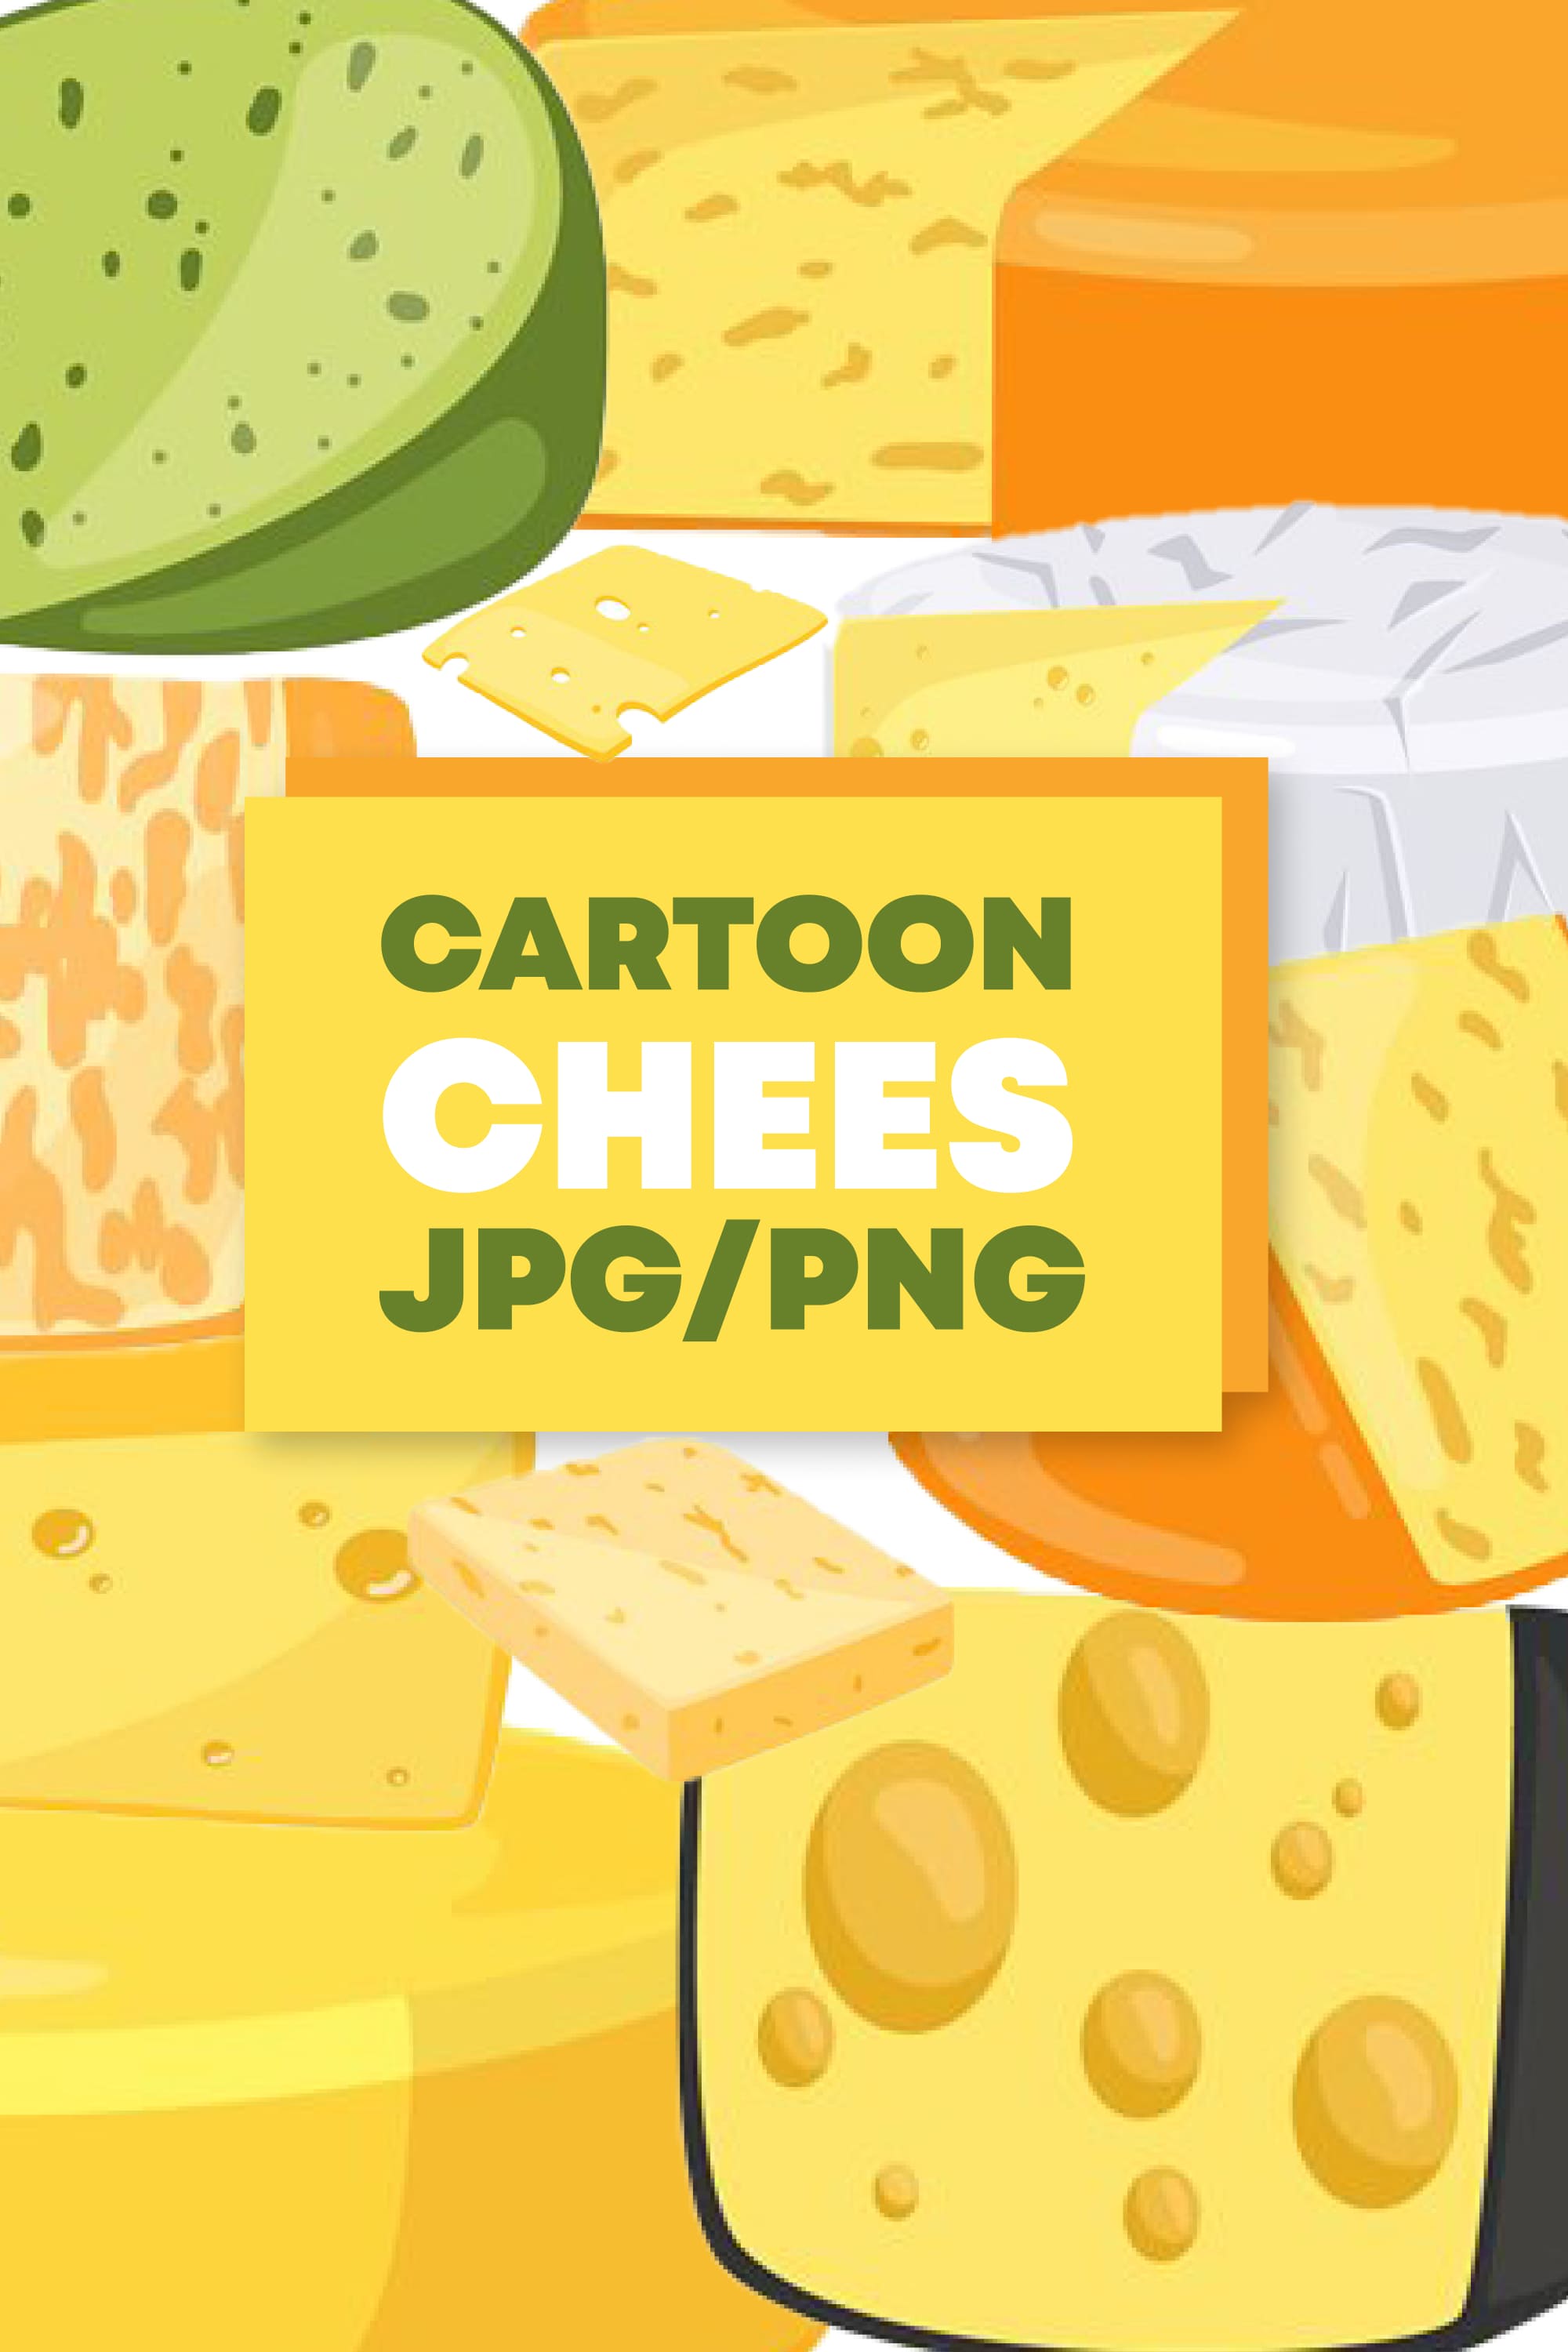 Set of cartoon images of different types of cheese.